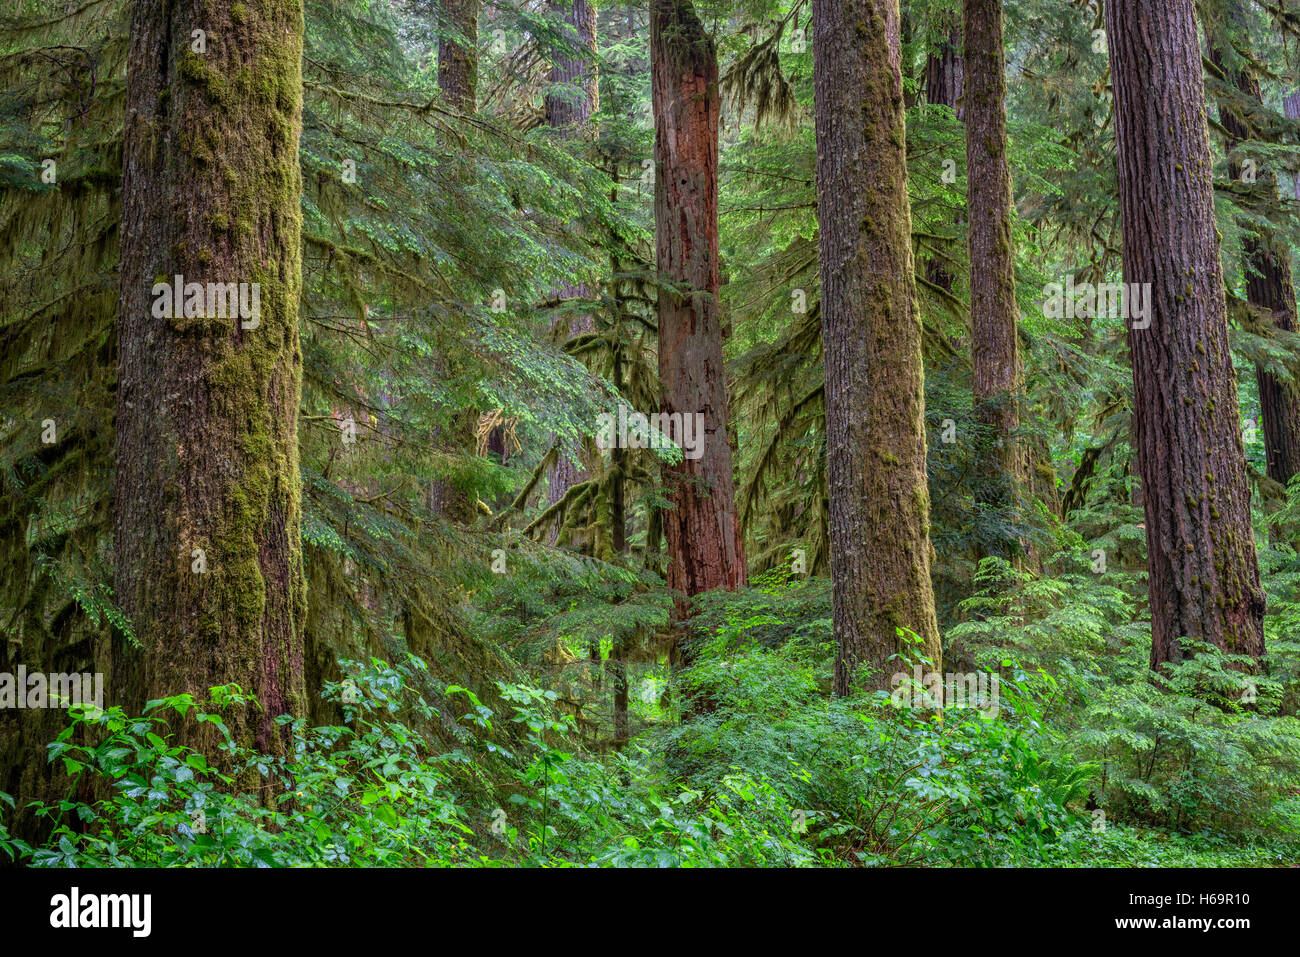 USA, Oregon, Willamette National Forest, Opal Creek Wilderness, Lush, old growth forest with Douglas fir and western hemlock. Stock Photo